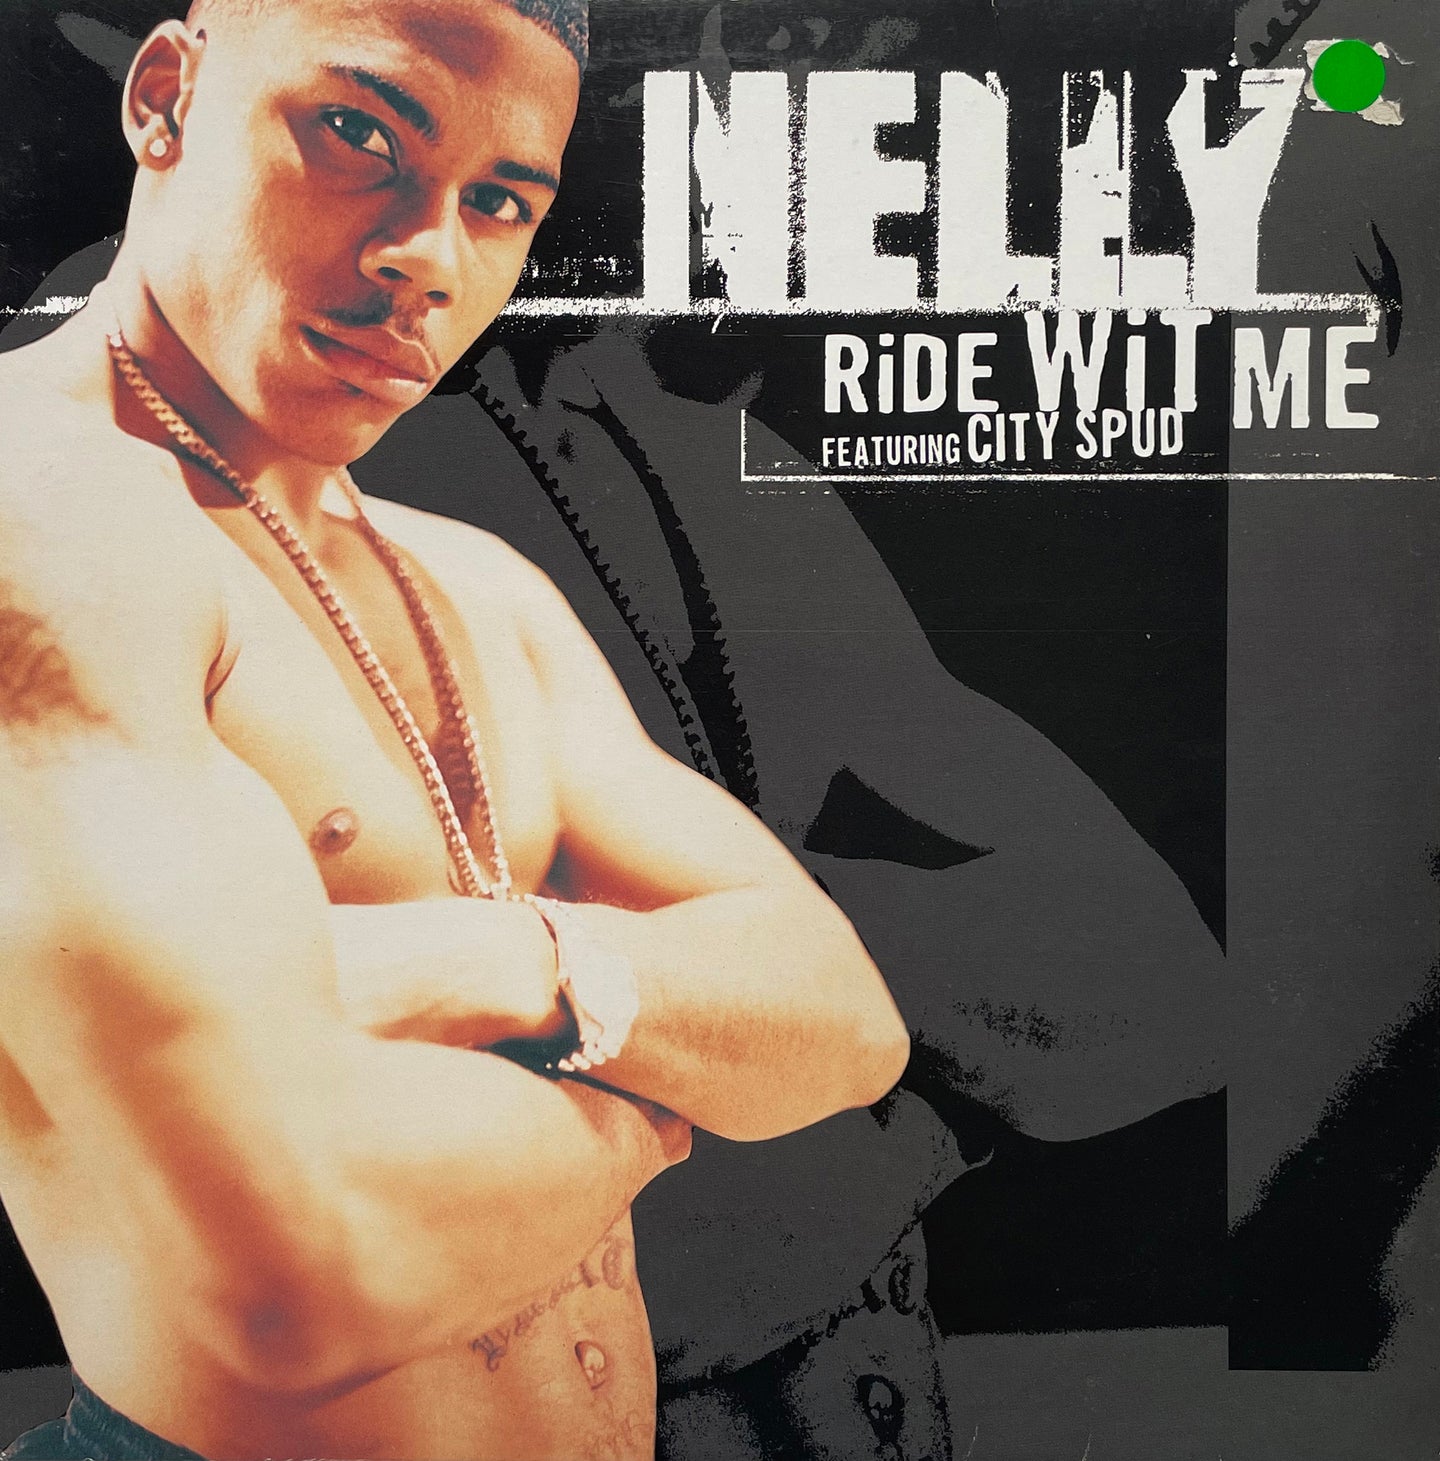 Nelly Feat City Spud - Ride Wit Me 12